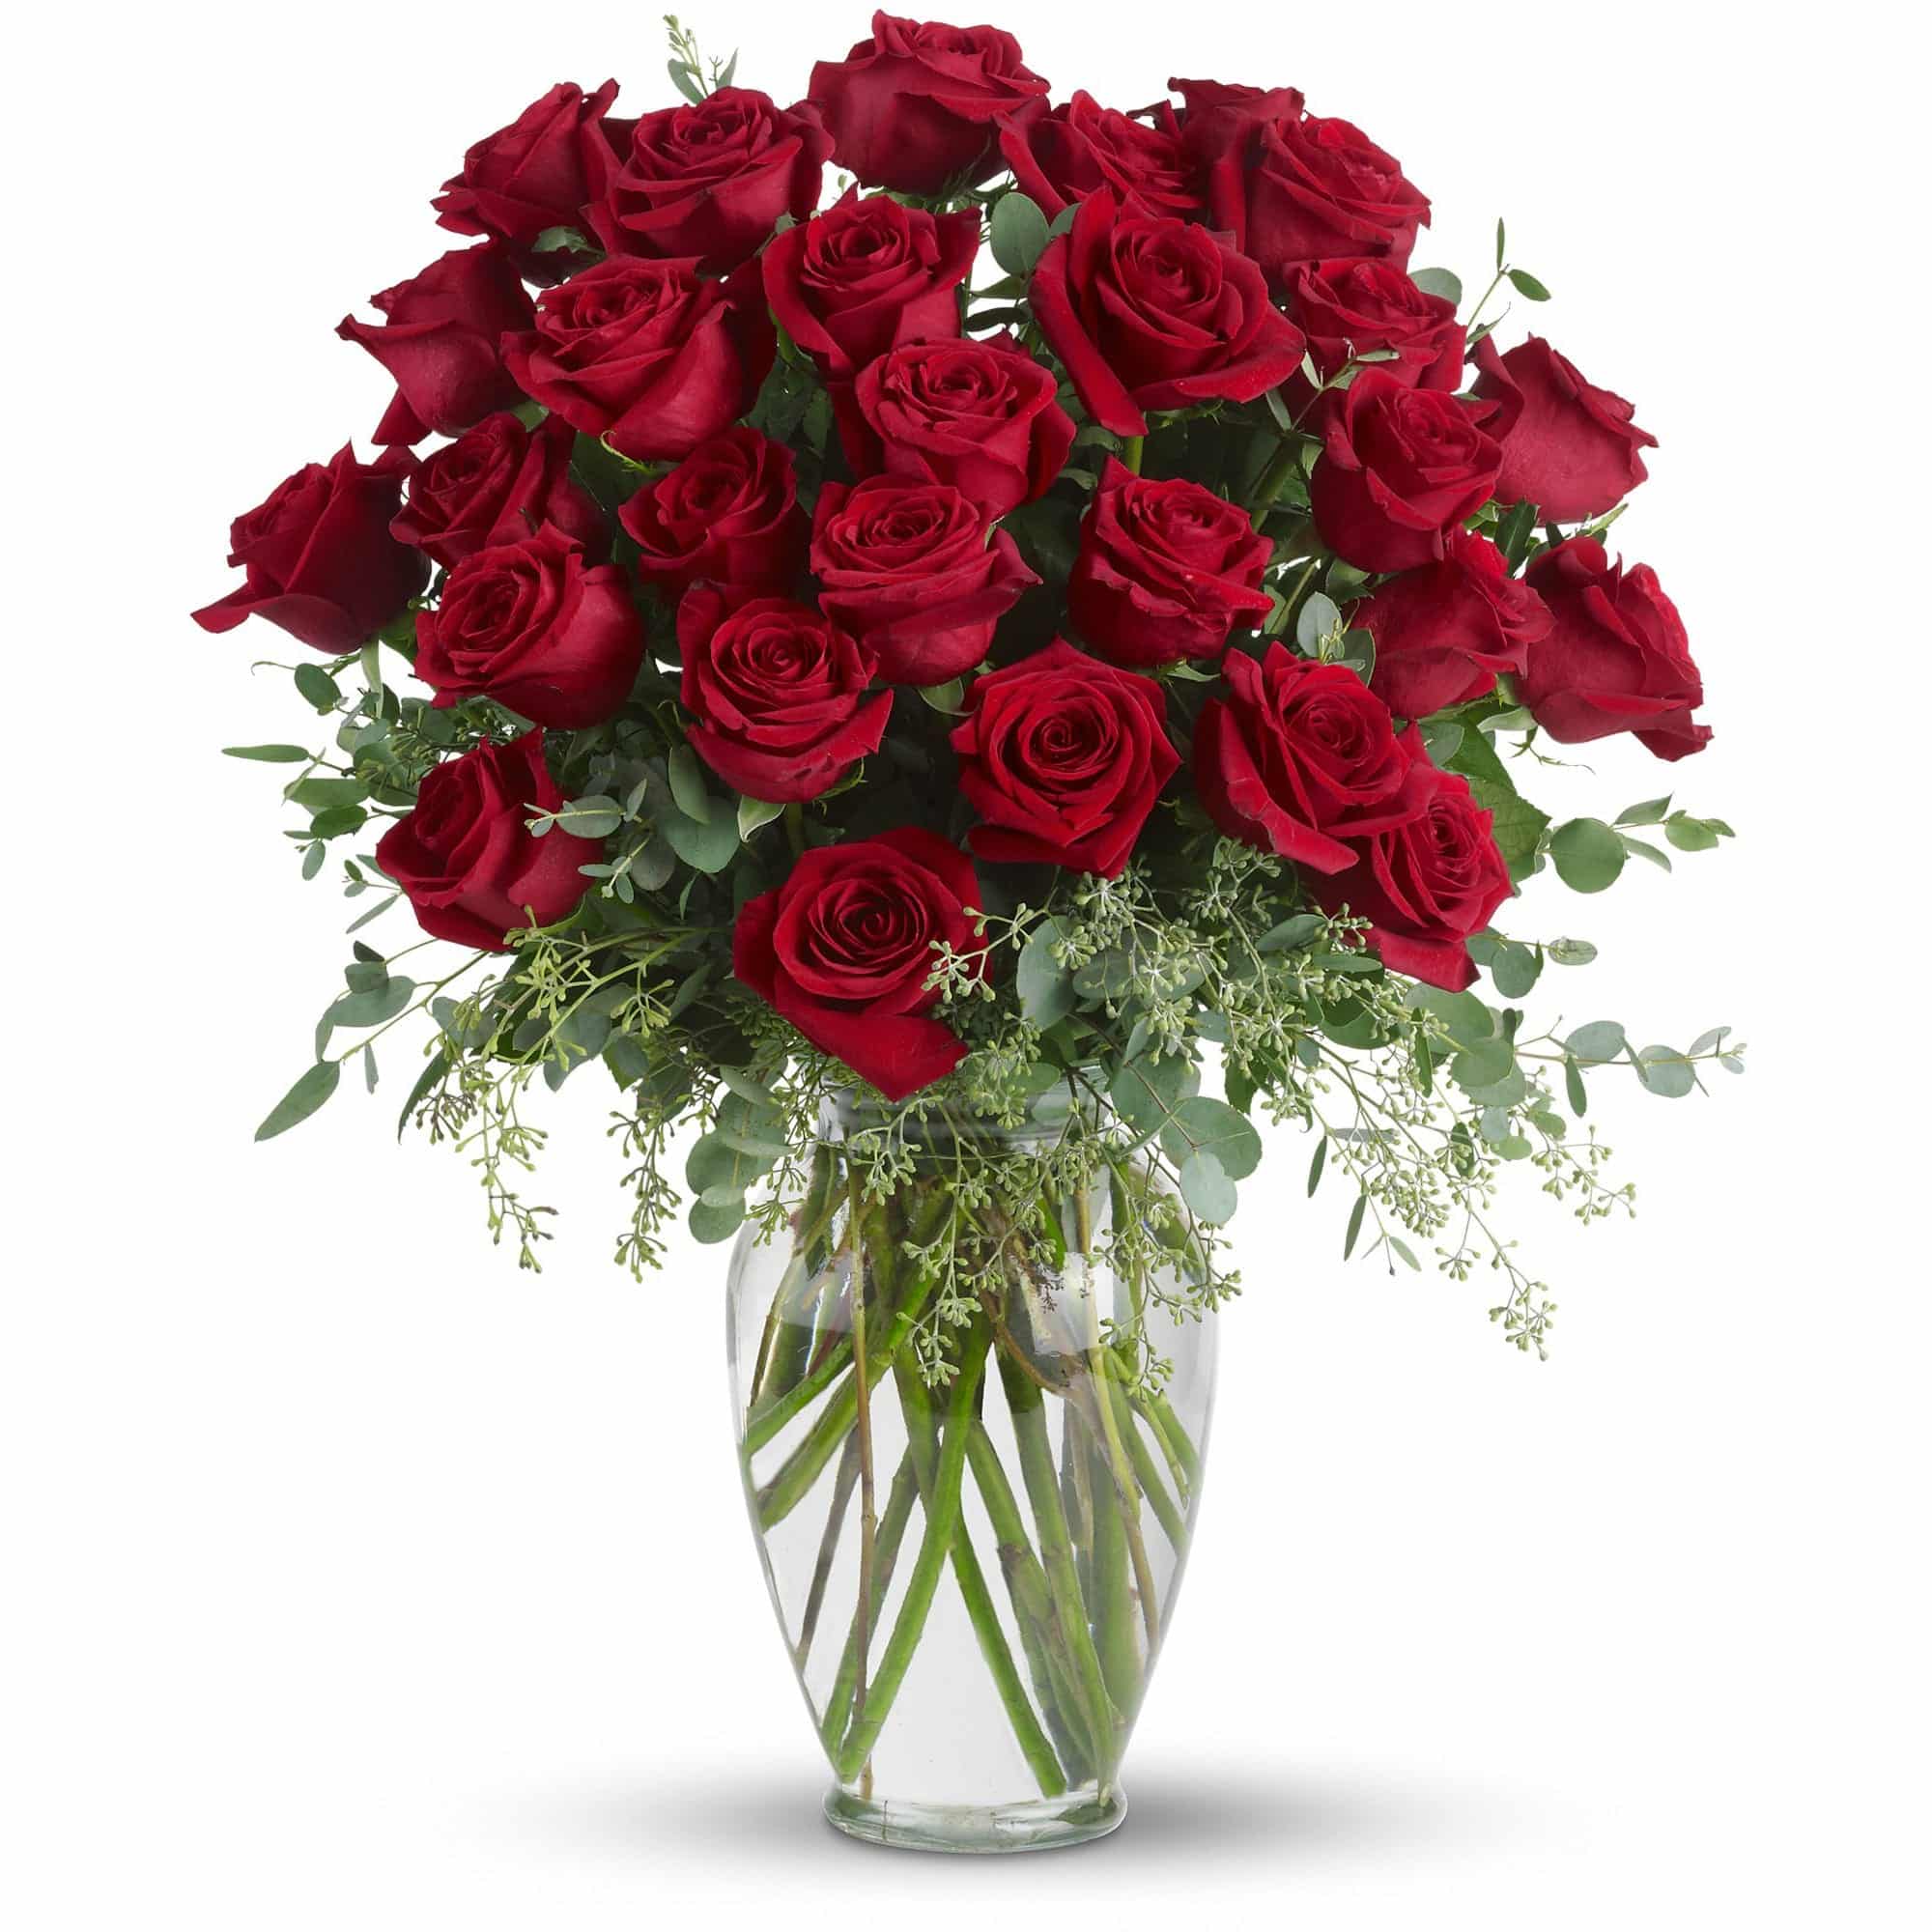 thirty red roses in a vase